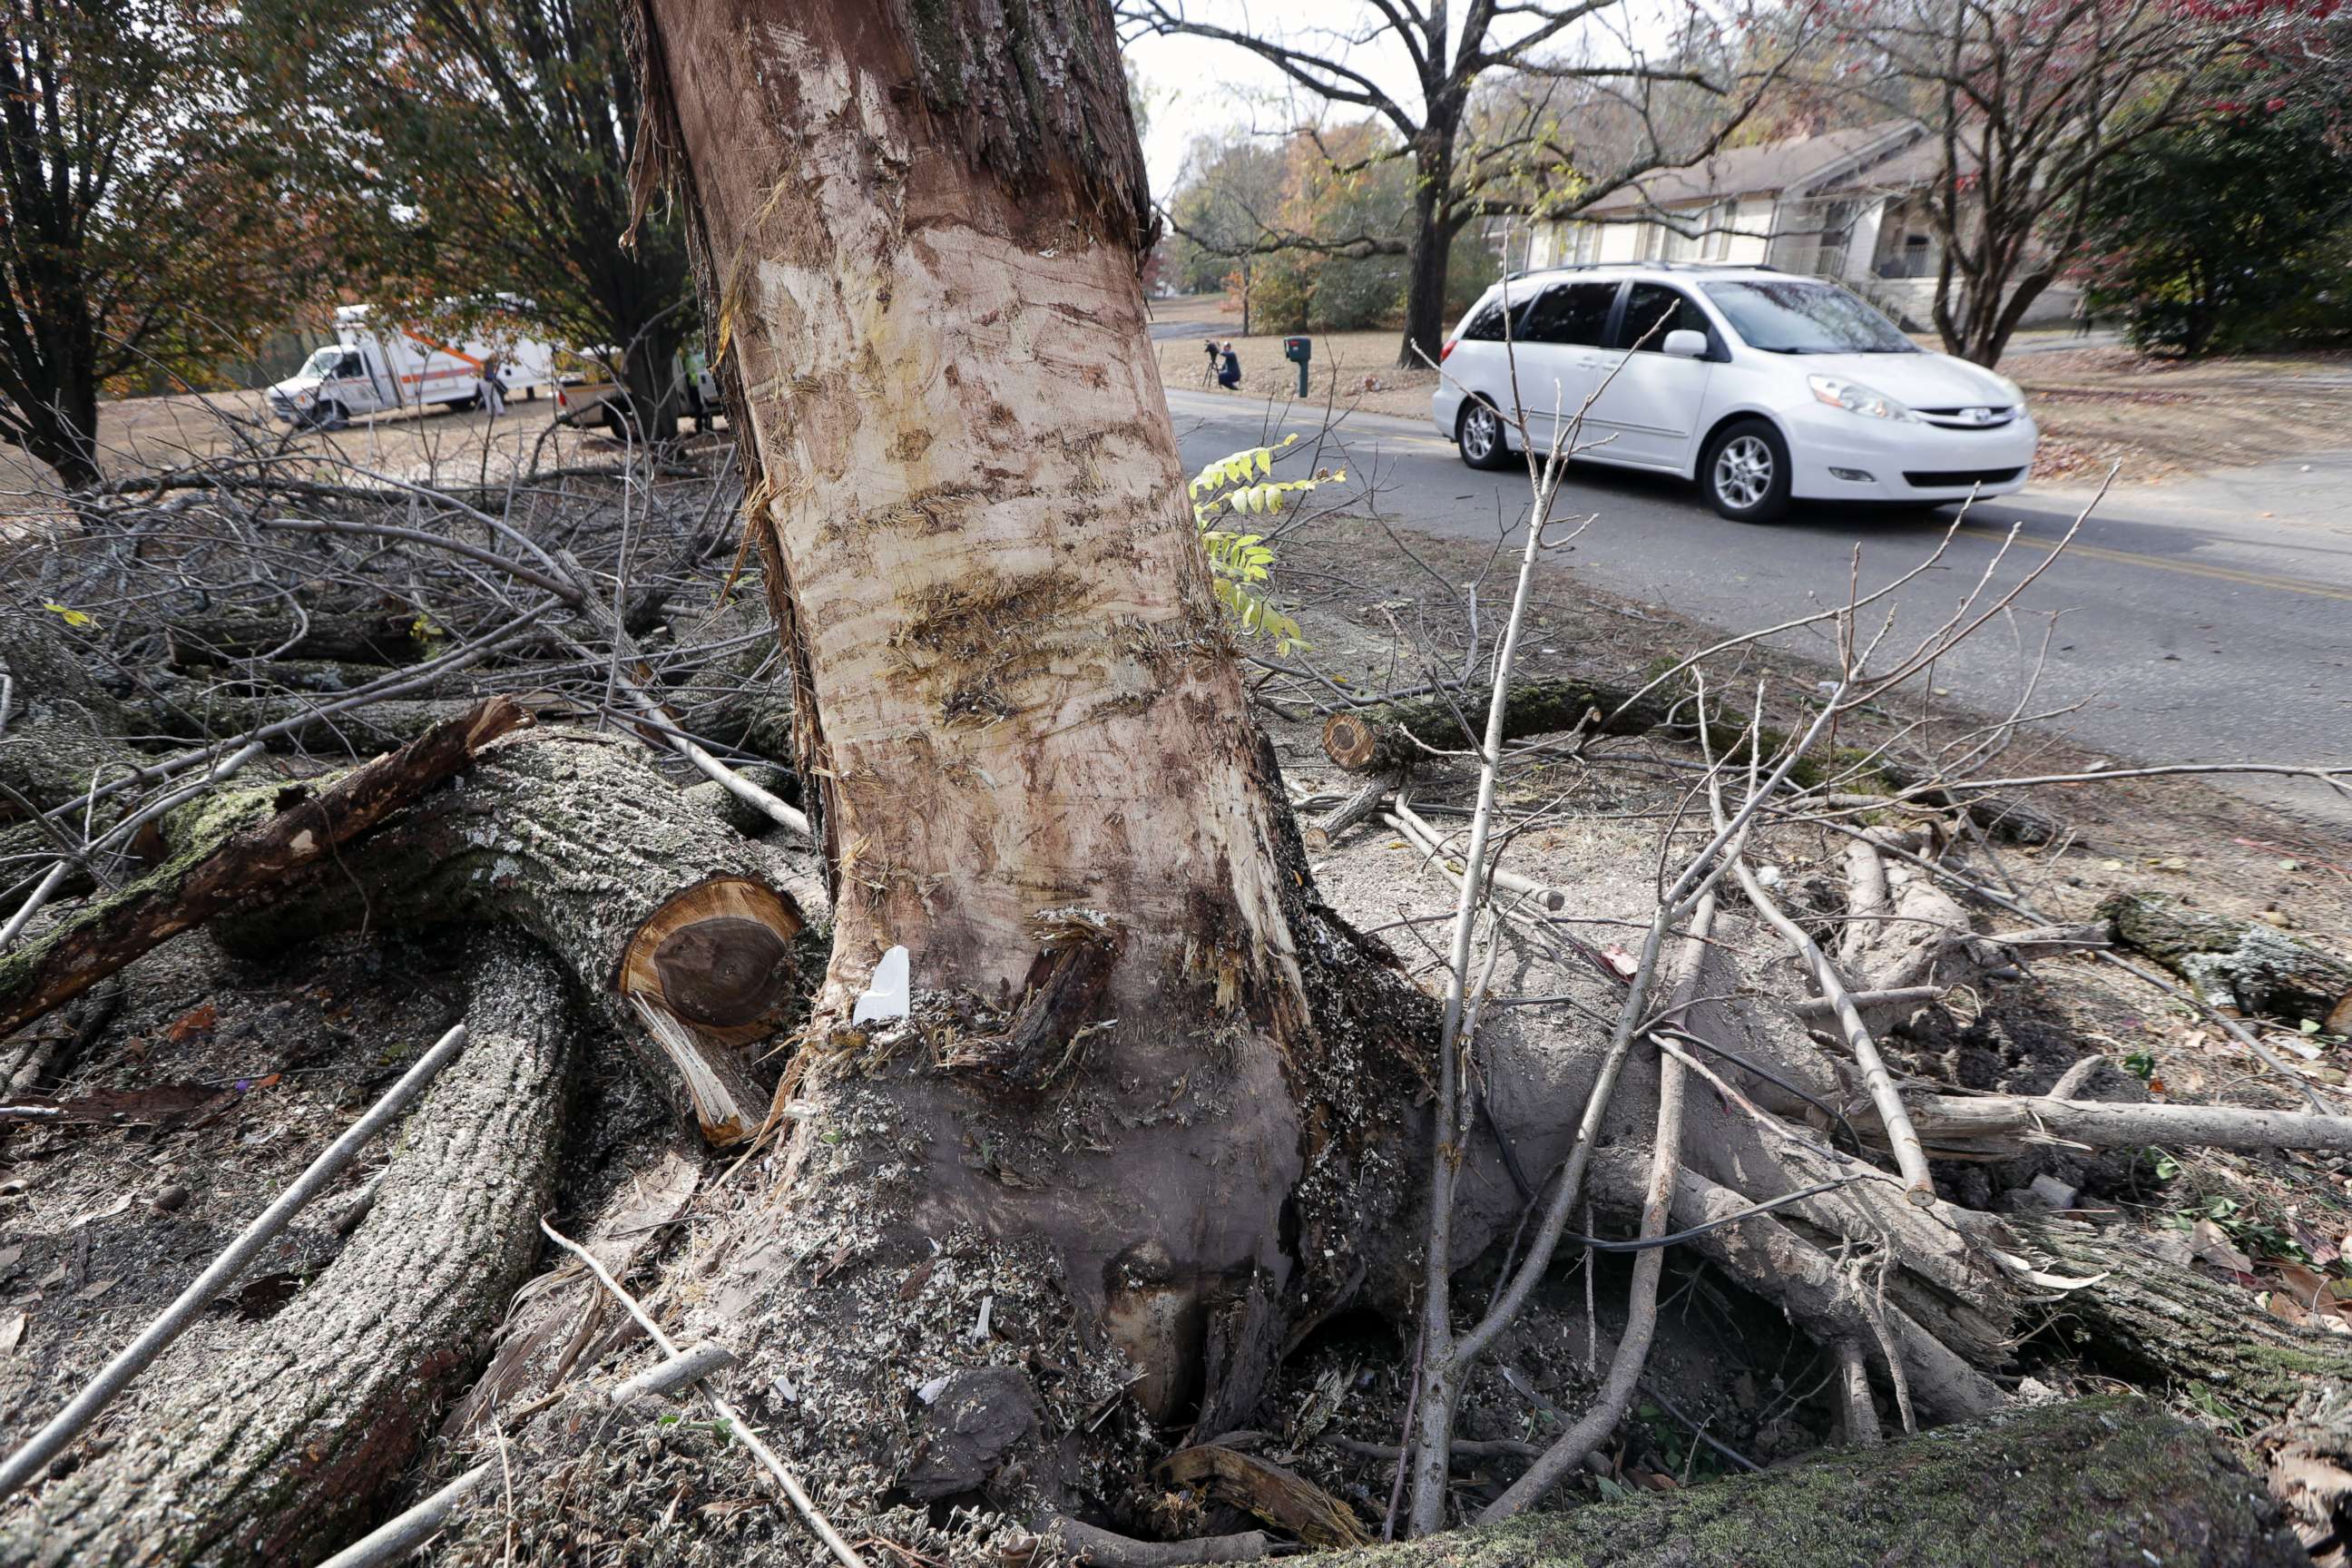 PHOTO: Traffic passes a tree that was hit by a school bus in Chattanooga, Tenn., Nov. 22, 2016. The bark of the tree was stripped off during the crash.